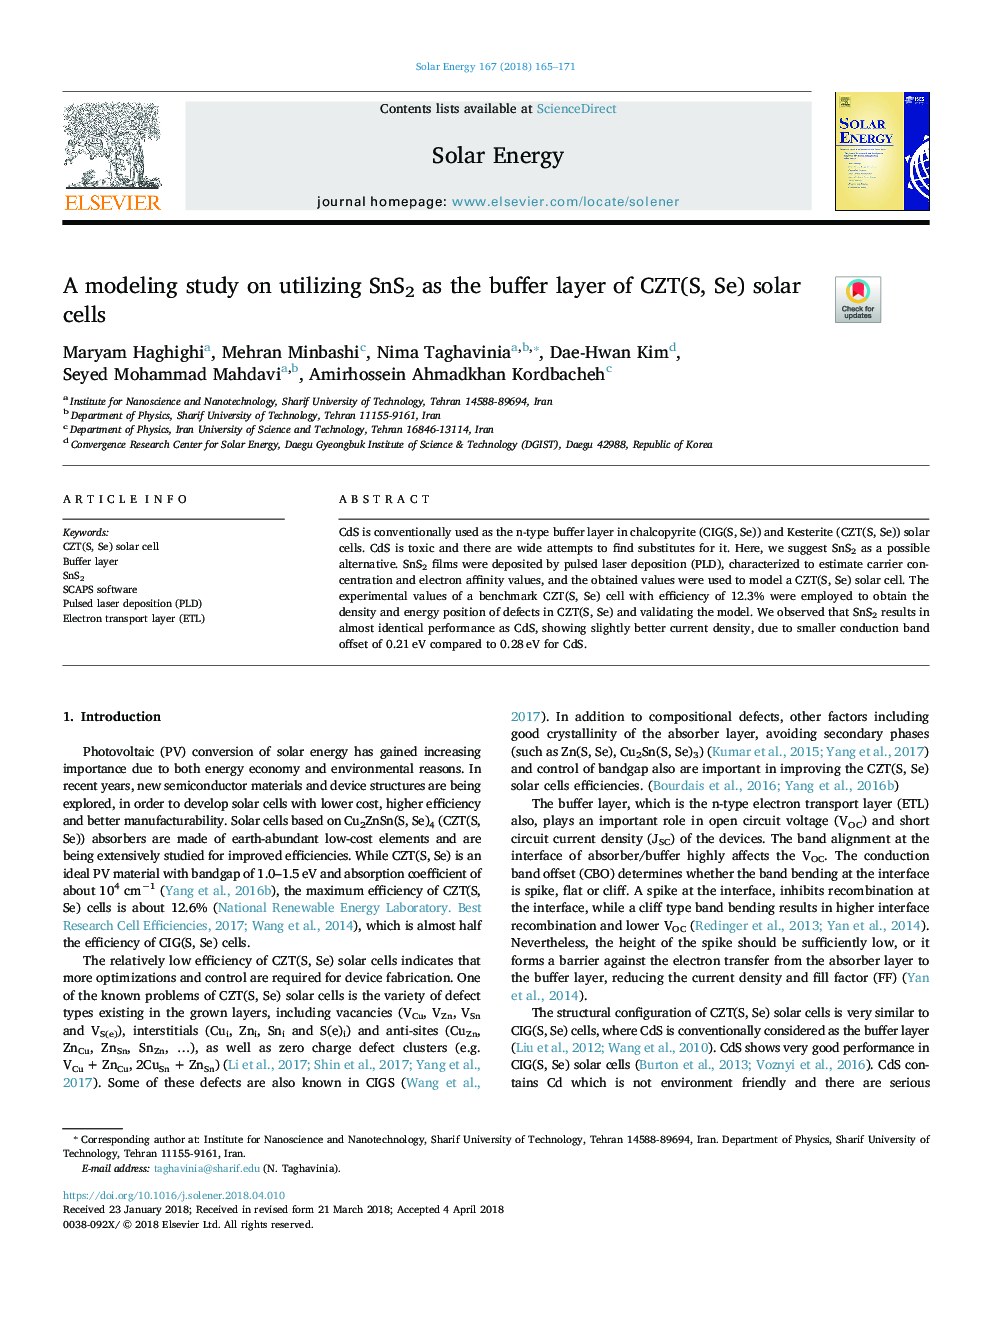 A modeling study on utilizing SnS2 as the buffer layer of CZT(S, Se) solar cells